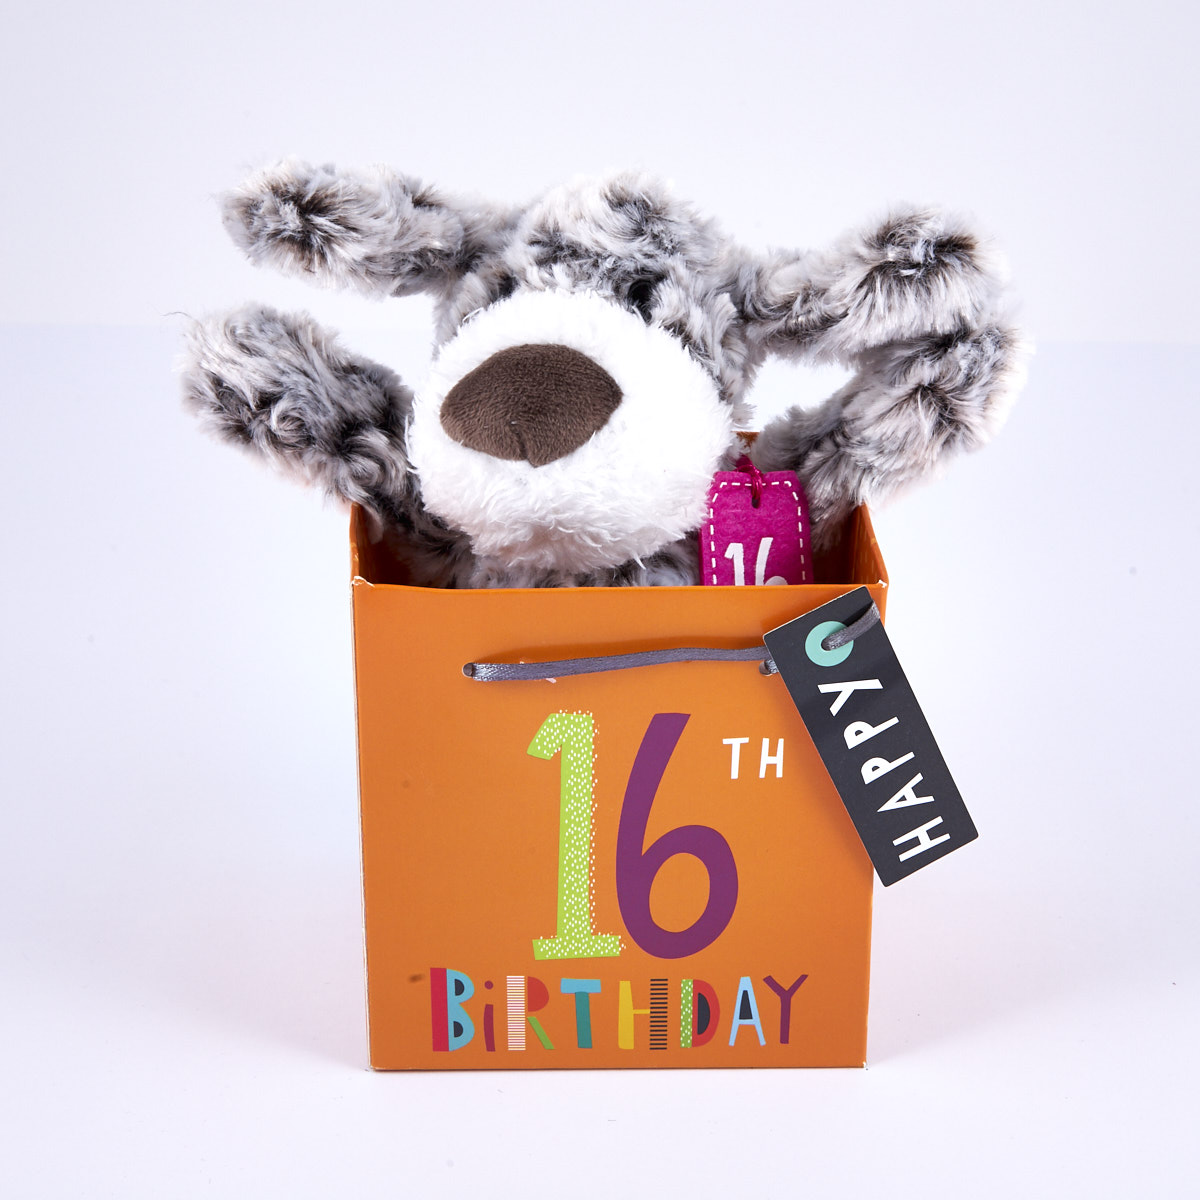 Buy 16th Birthday Grey & White Dog In Gift Bag for GBP 2